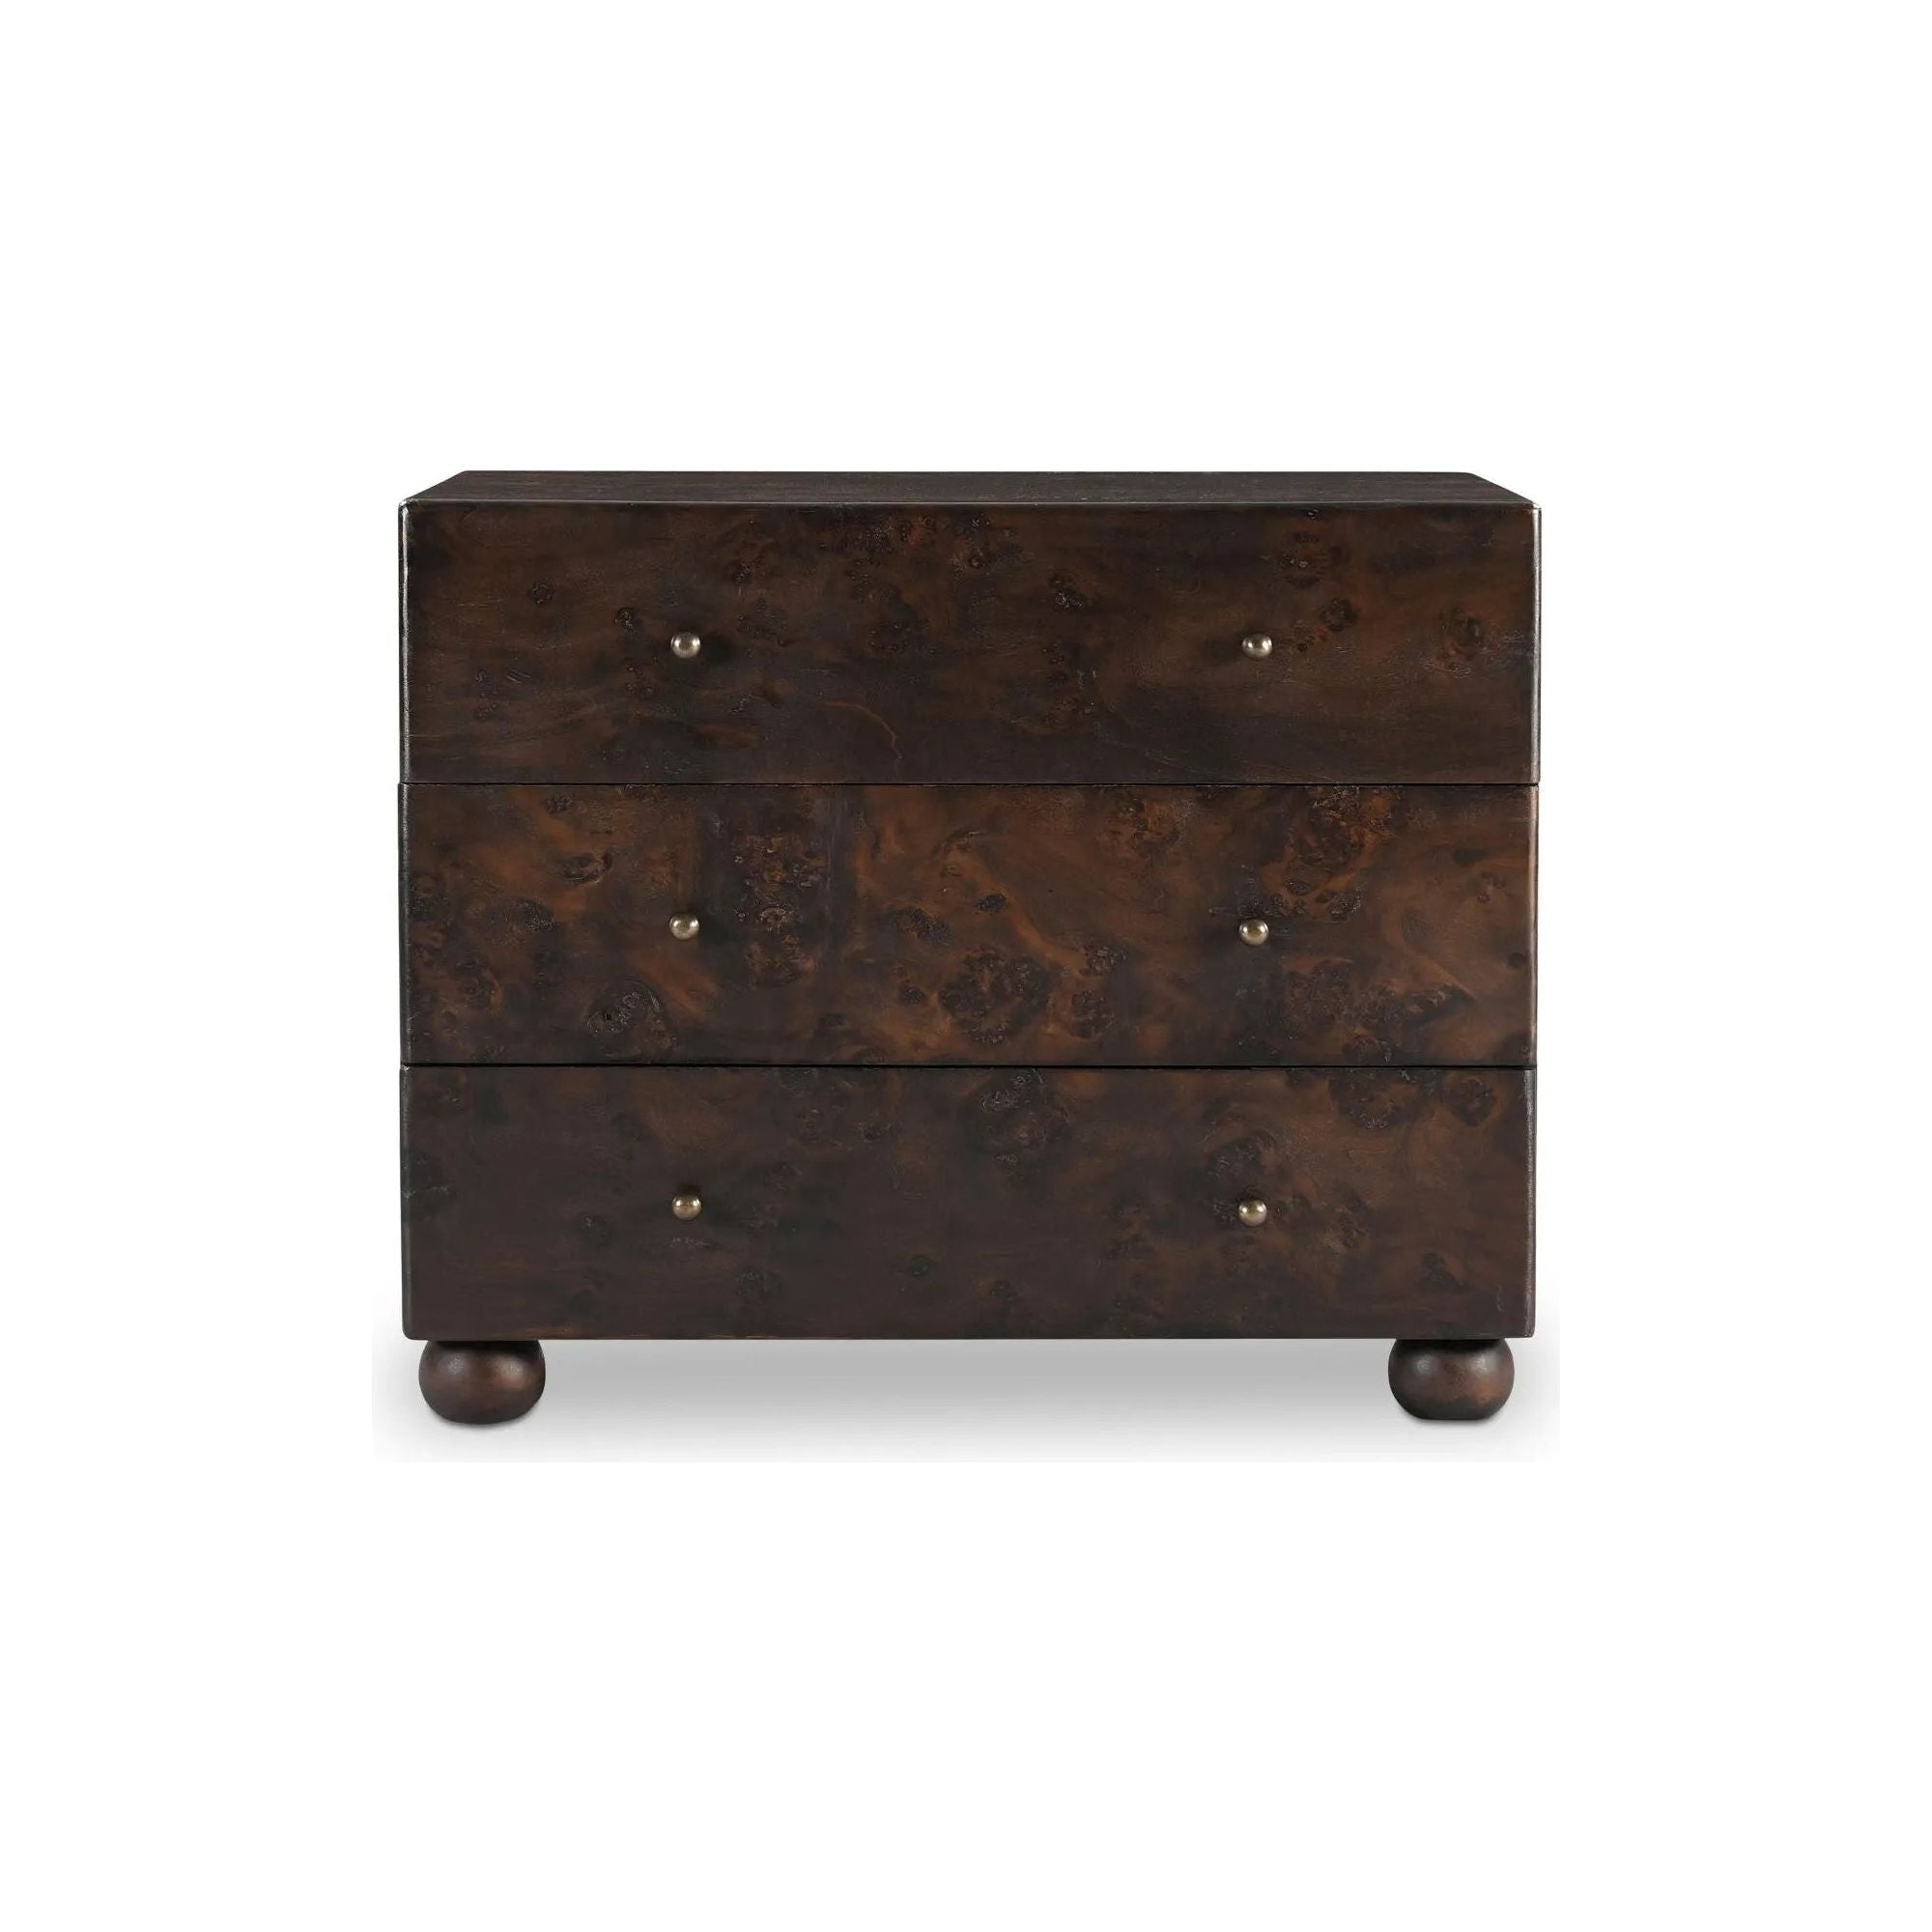 As if it tells a story woven through generations, the York 3-drawer nightstand was born from a profound respect for heritage. Amethyst Home provides interior design, new home construction design consulting, vintage area rugs, and lighting in the Winter Garden metro area.